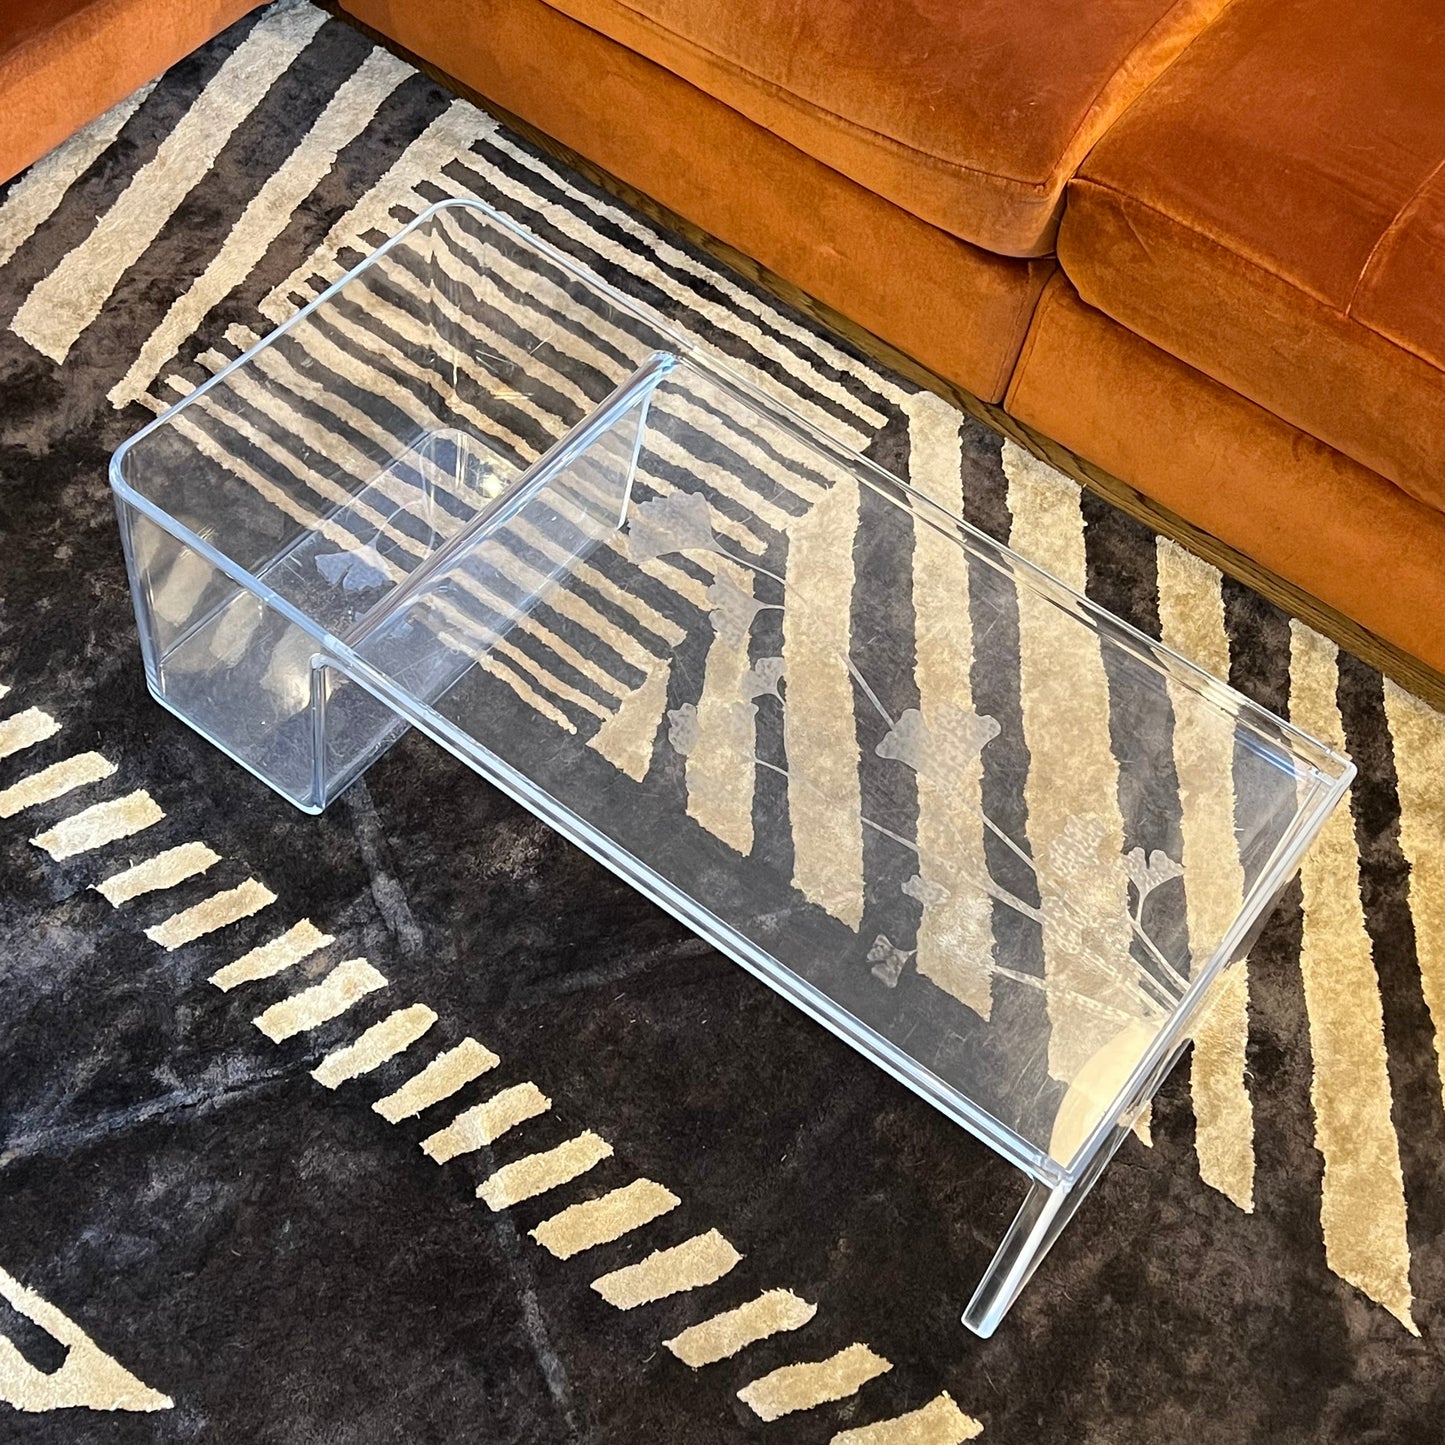 Kartell Usame Coffee table